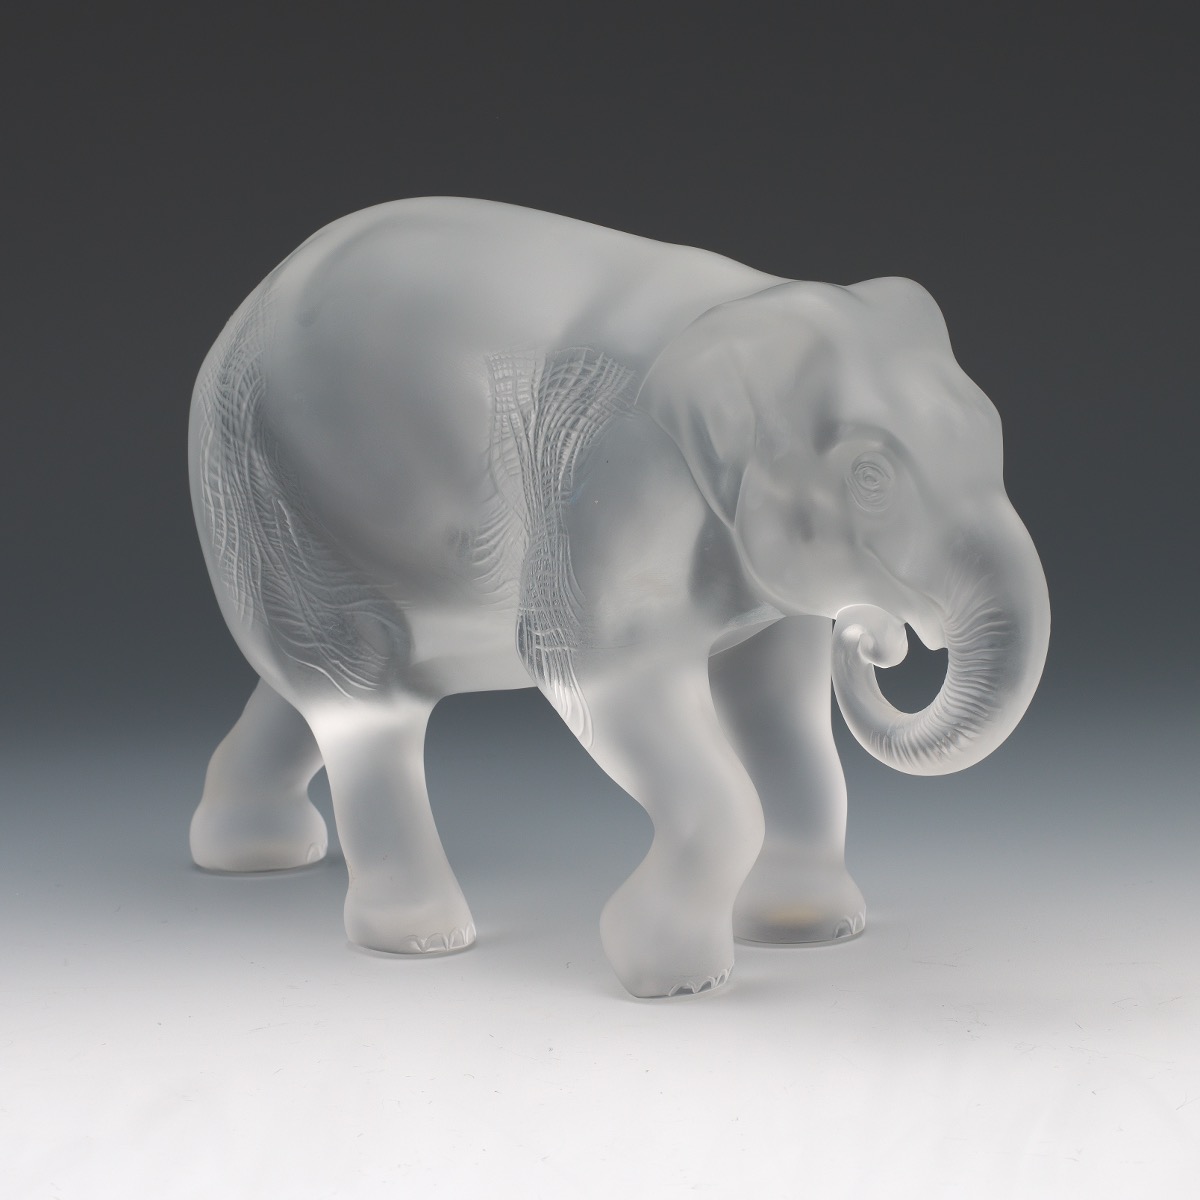 Lalique Crystal Java Elephant, 10.27.16, Sold: $590